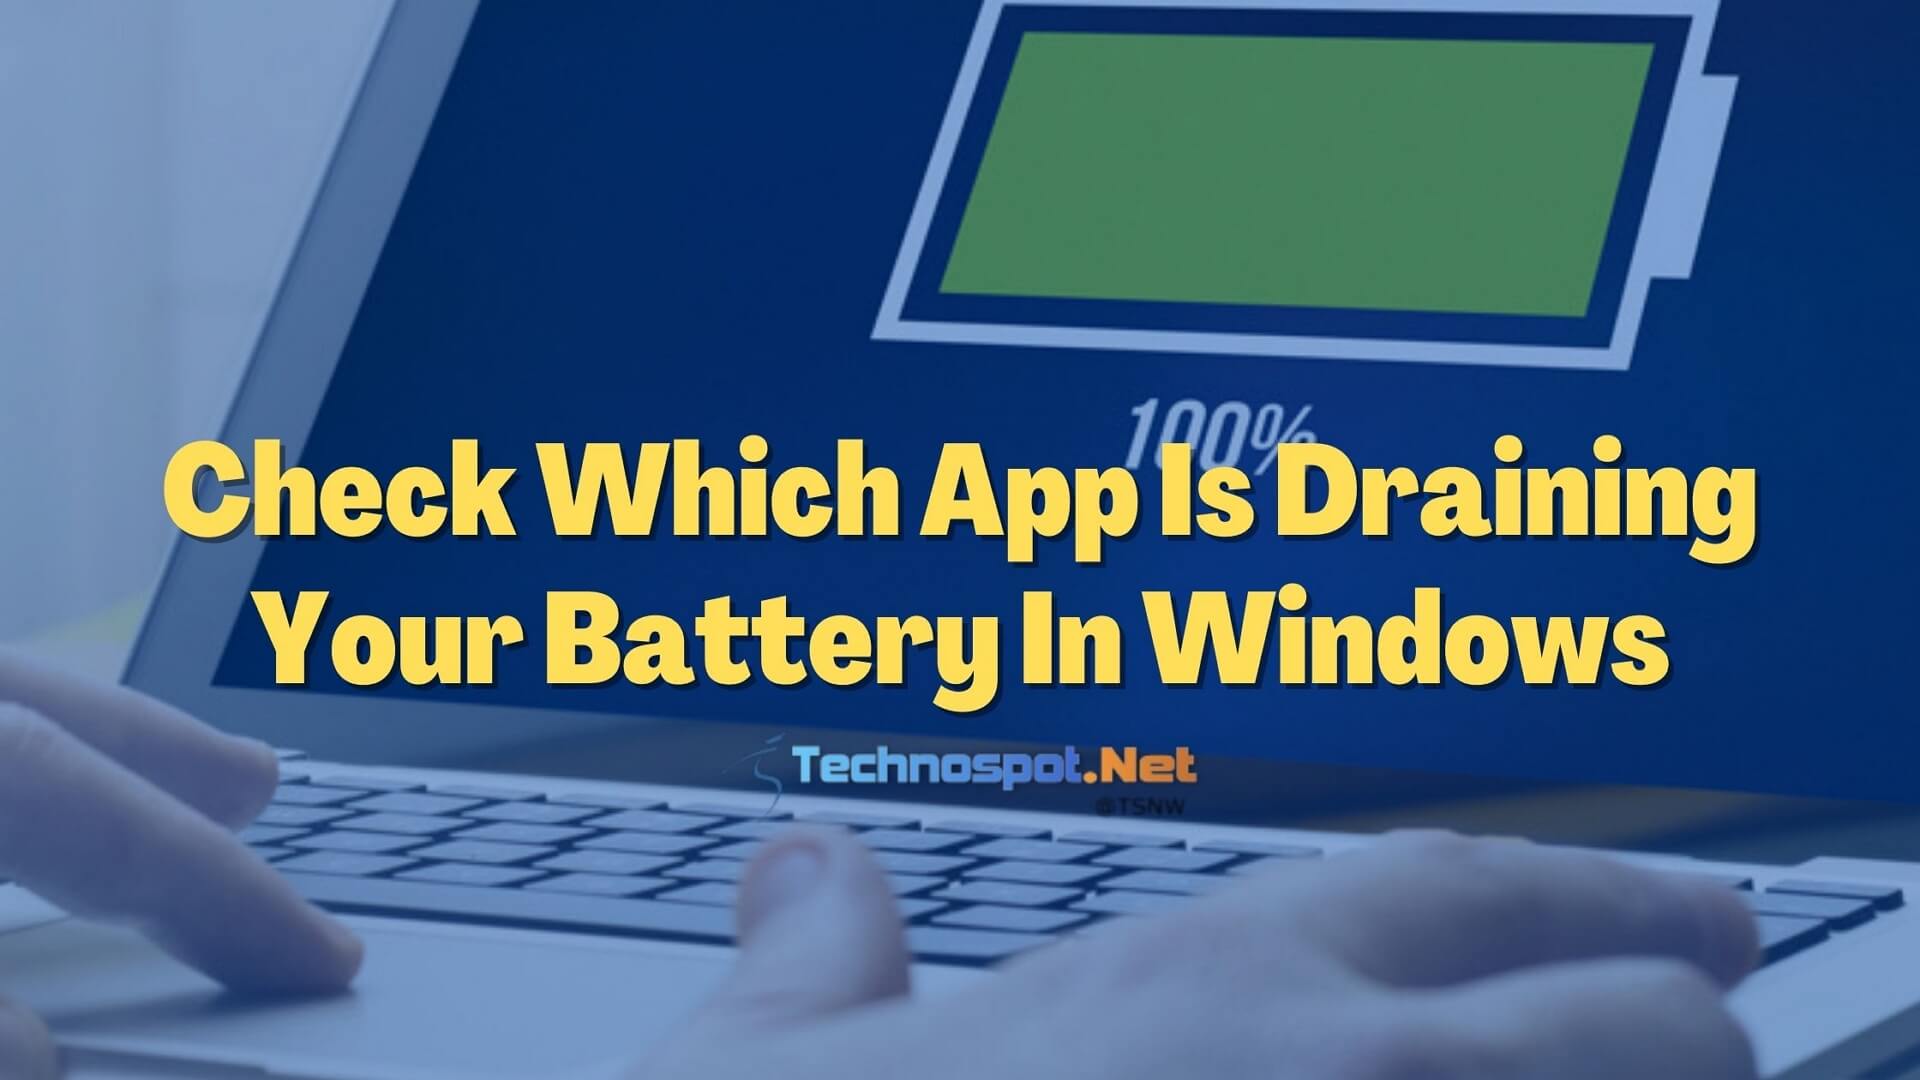 Check Which App Is Draining Your Battery In Windows